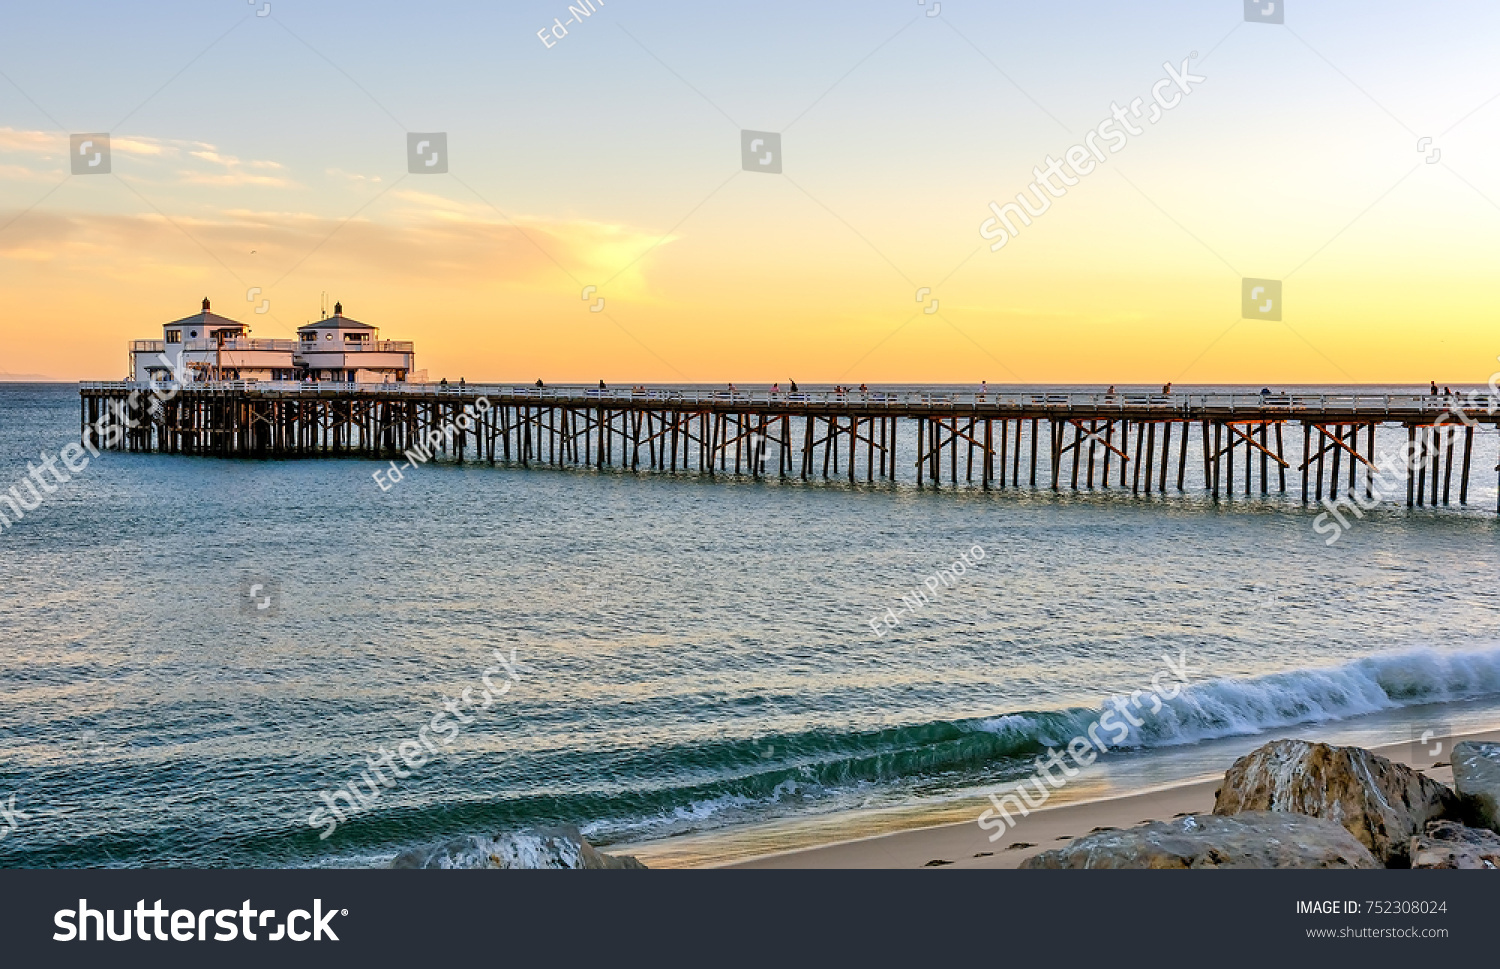 Sunset at Malibu pier and beach in Southern California #752308024